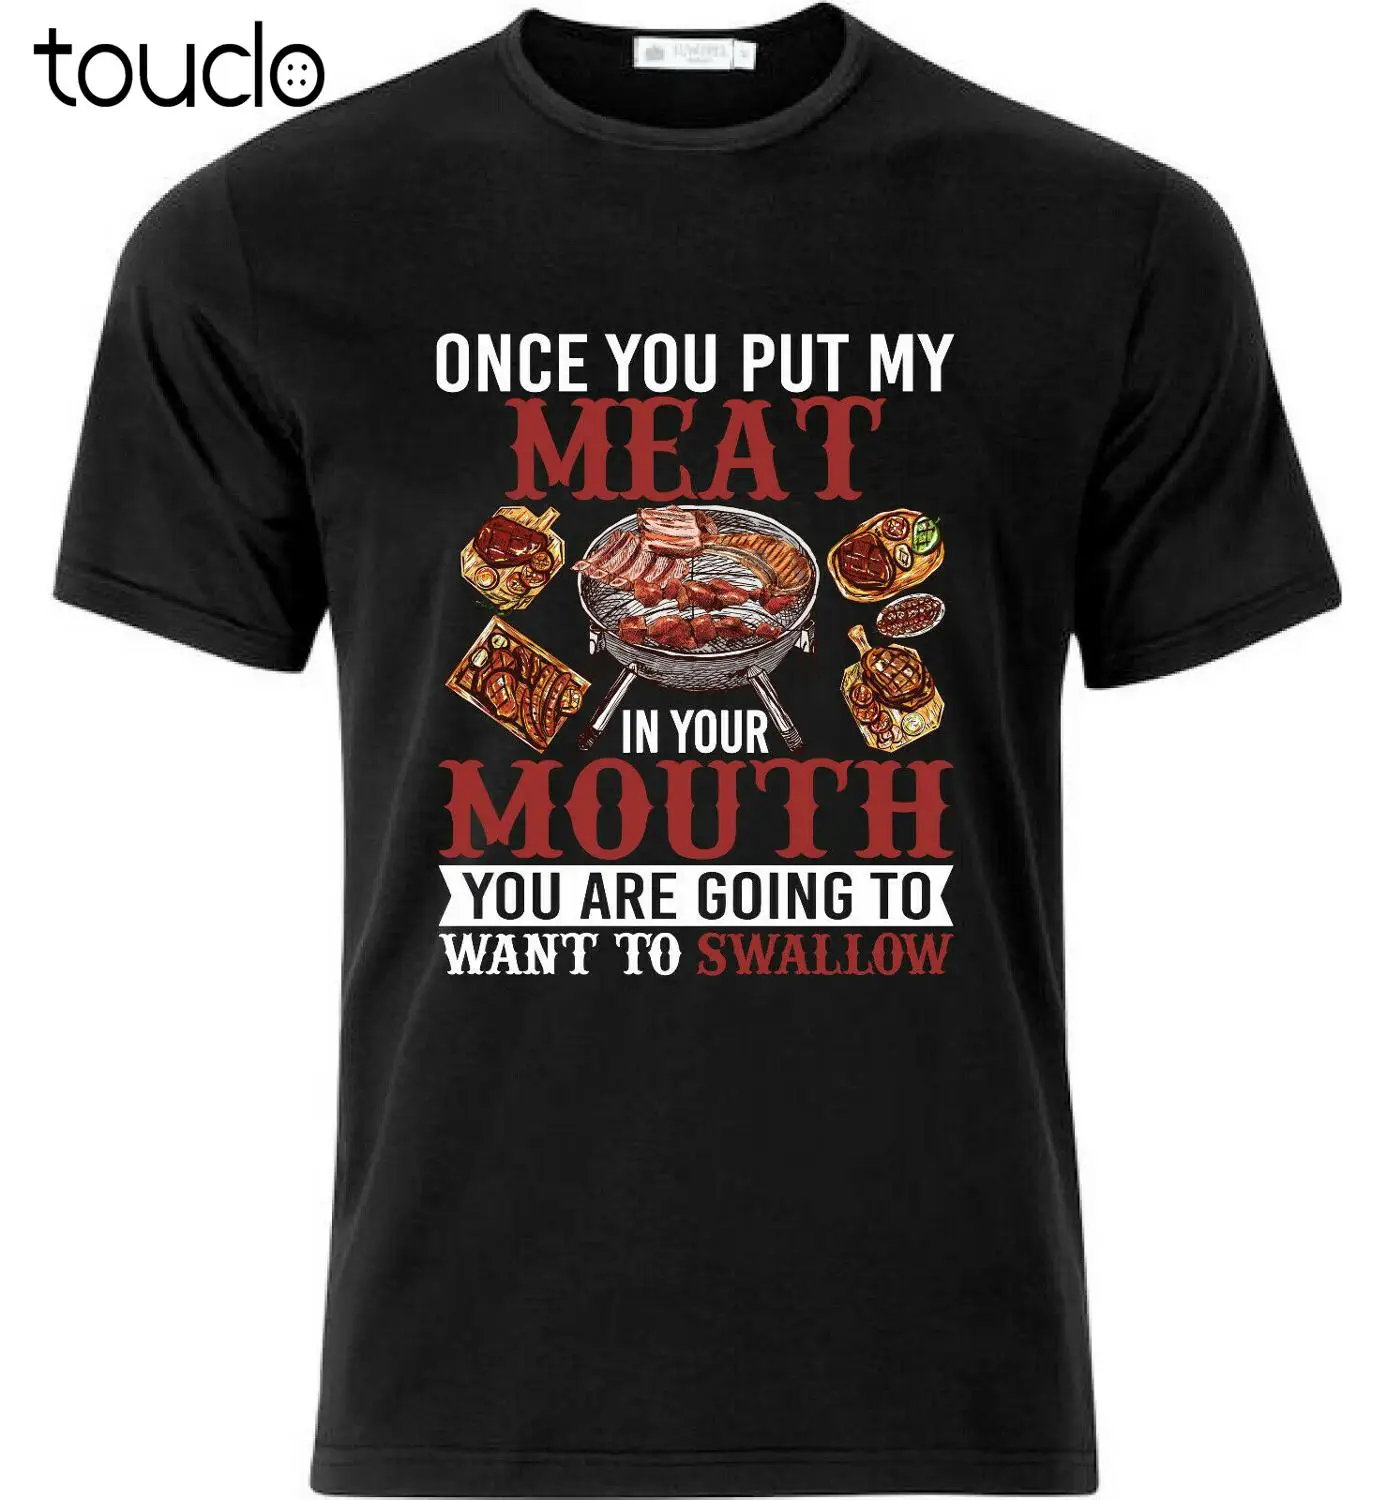 

New Bbq Once You Put My Meat In Your Mouth Funny T Shirt Black Unisex S-5Xl